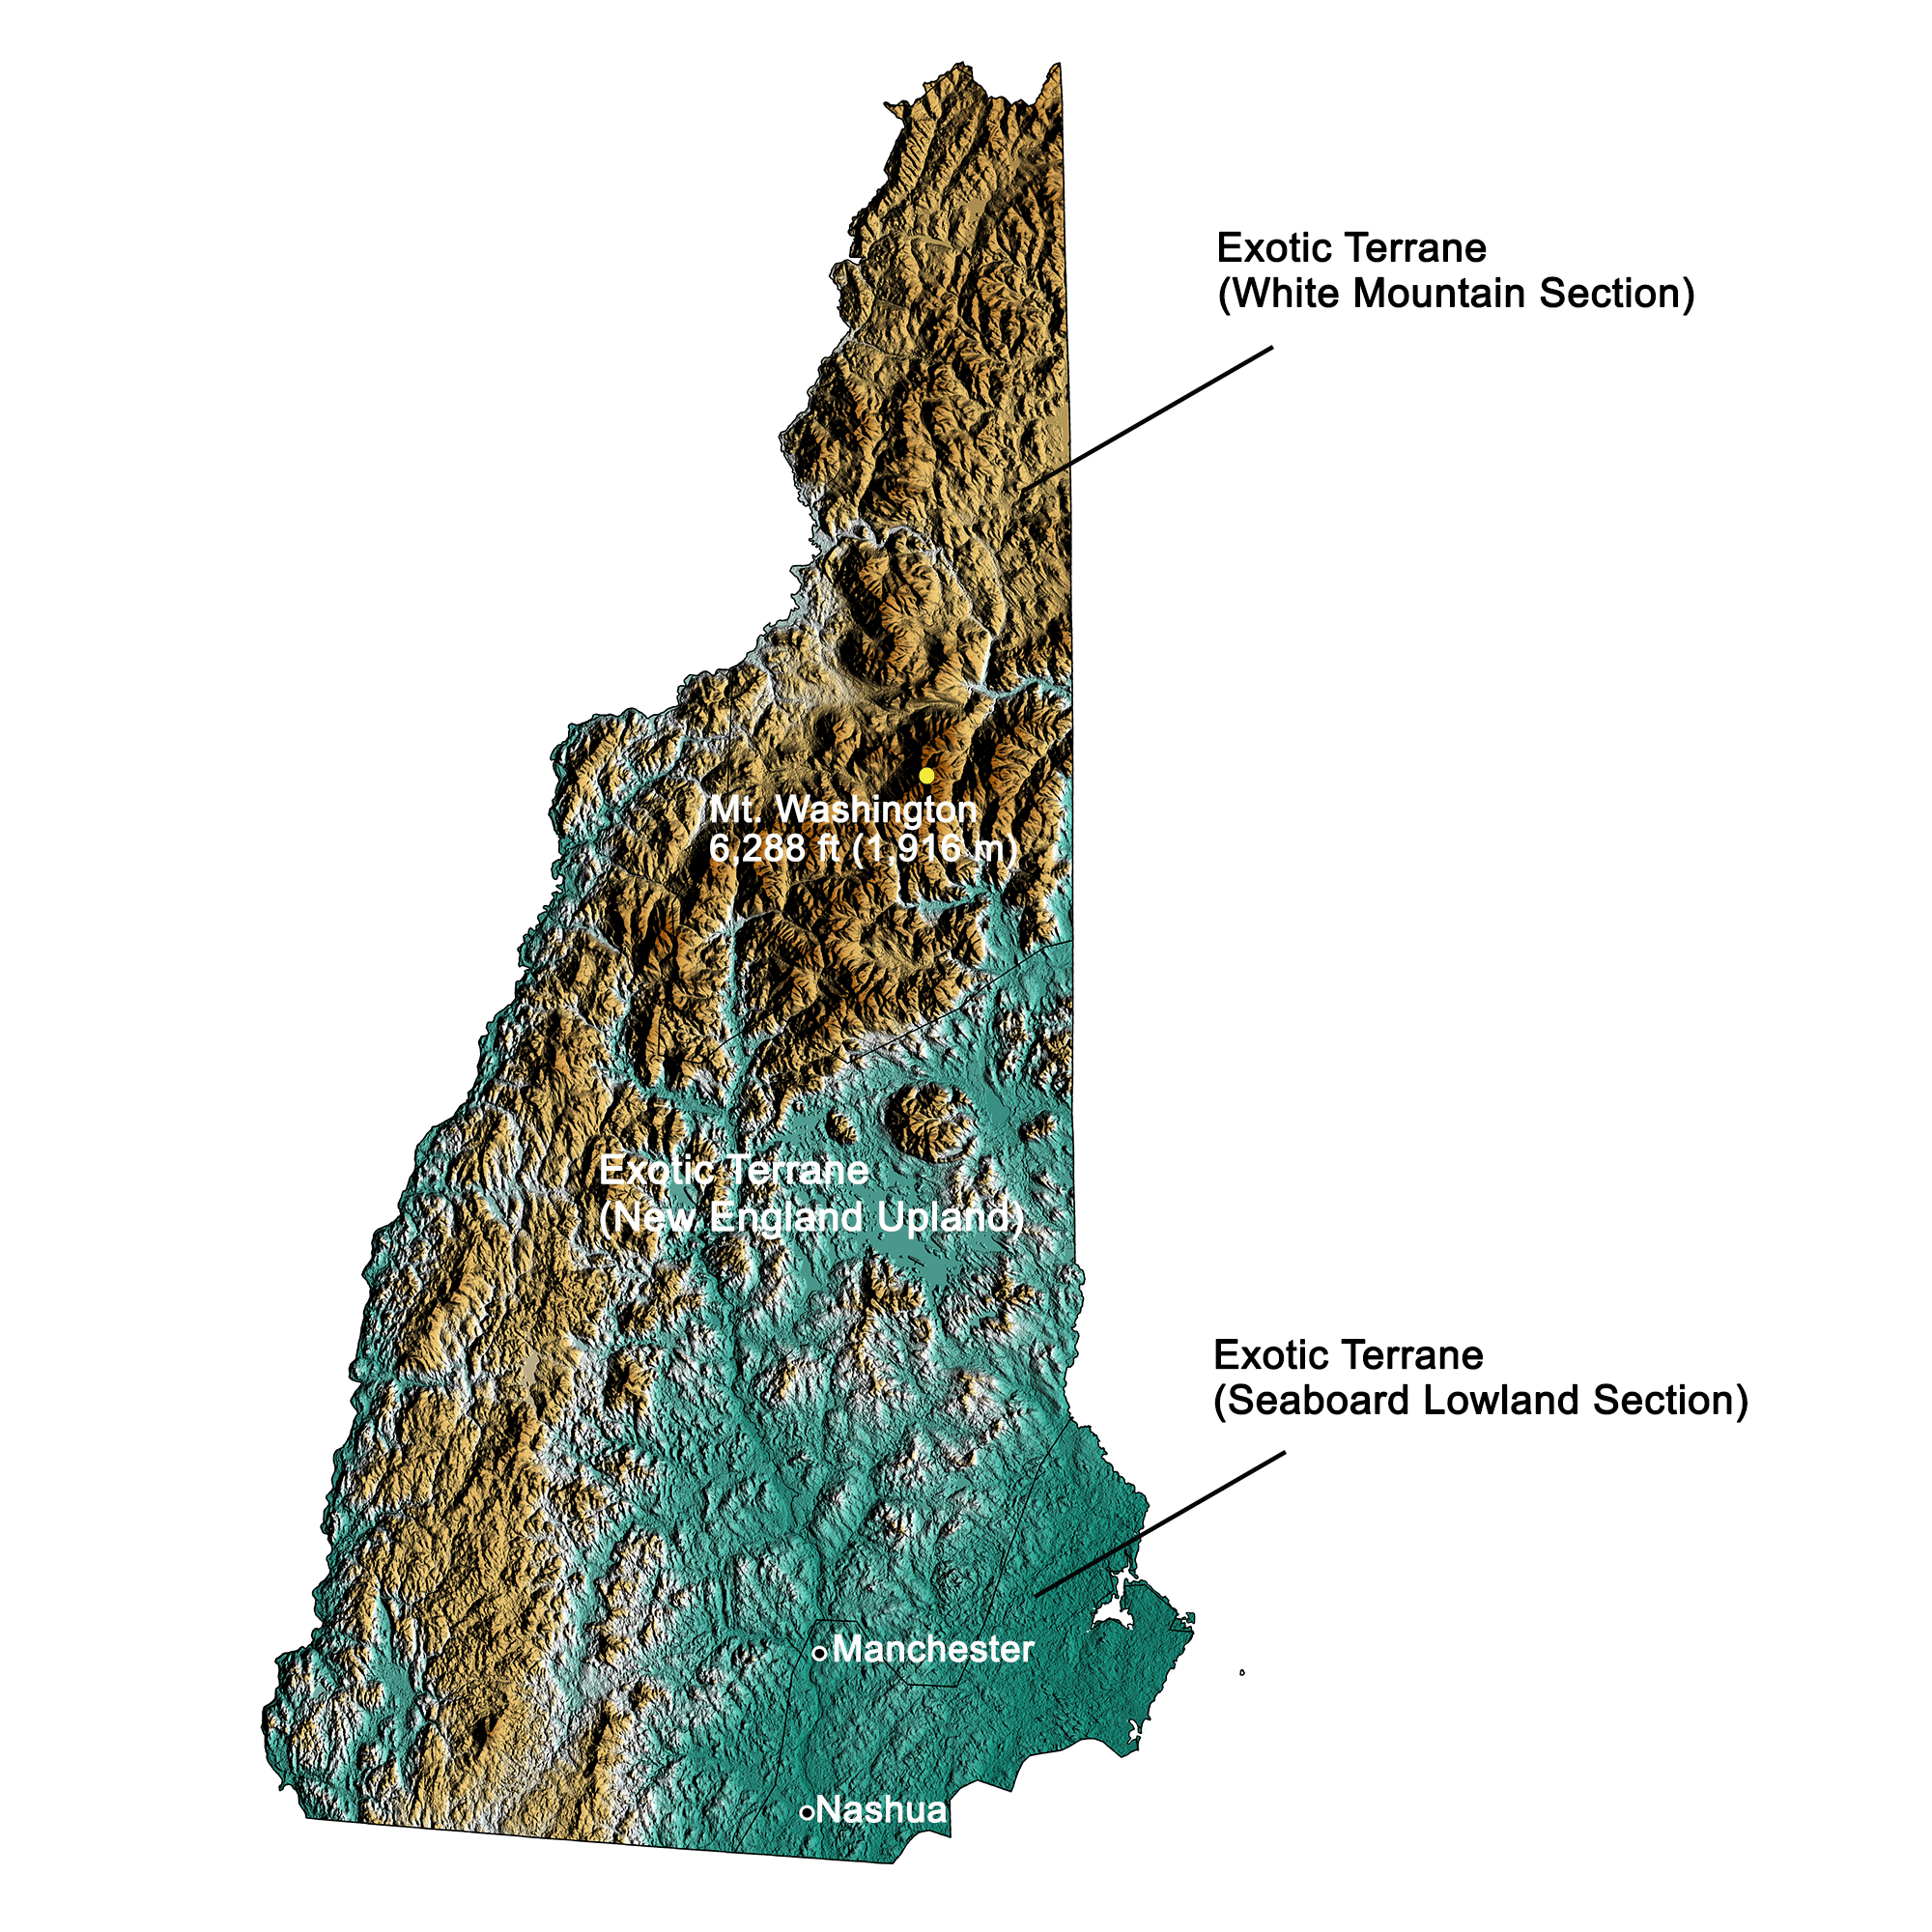 Topographic map of New Hampshire.